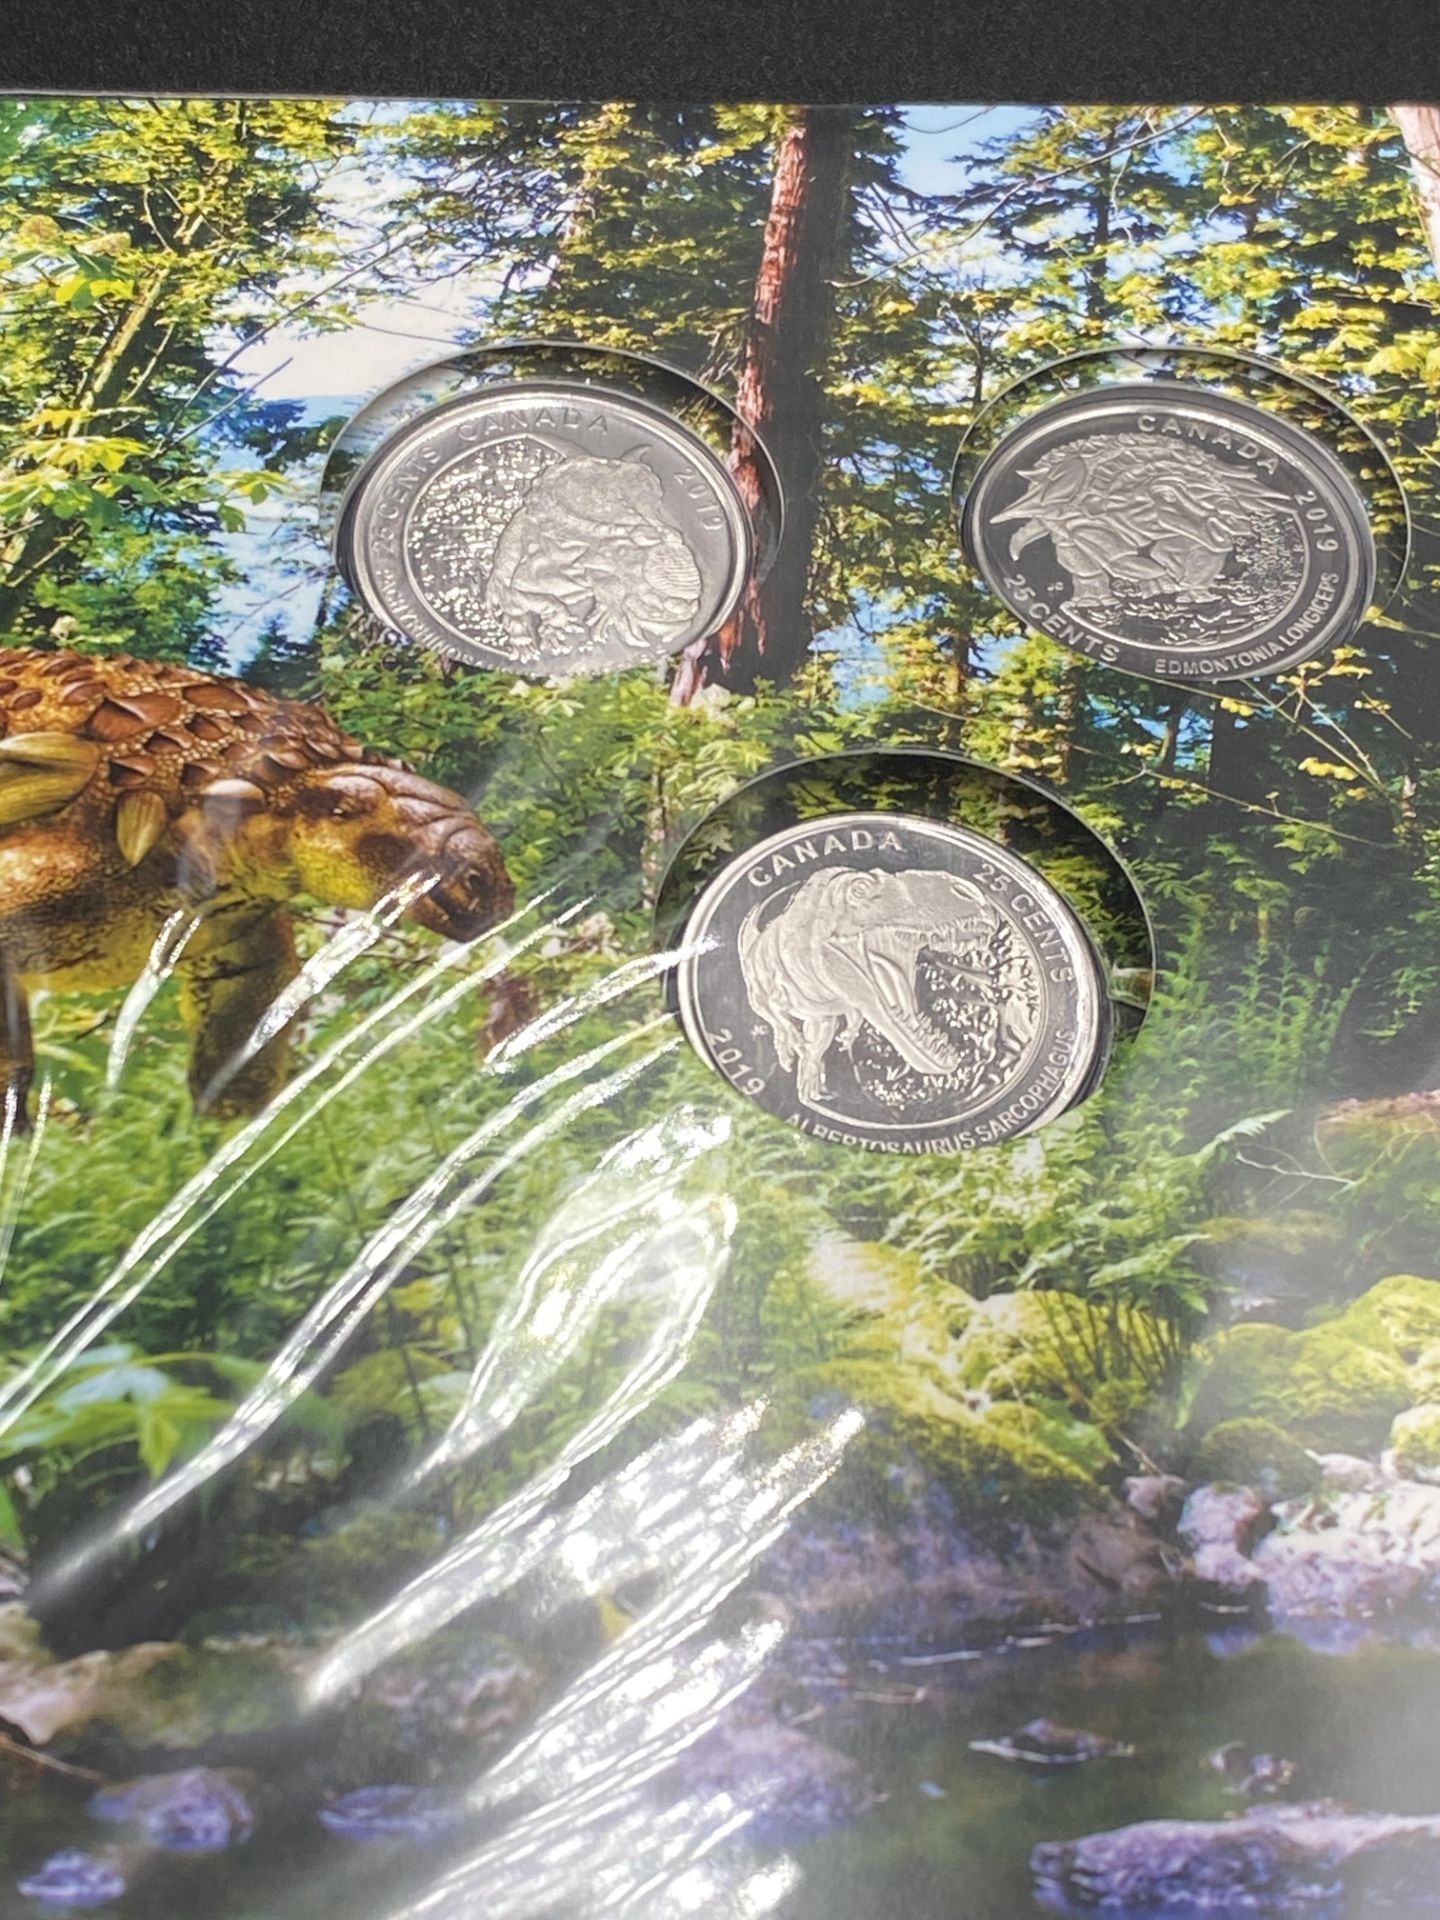 Westminster Coins, the Age of the Dinosaurs, 24 limited edition 24ct gold plated coins - Image 2 of 5